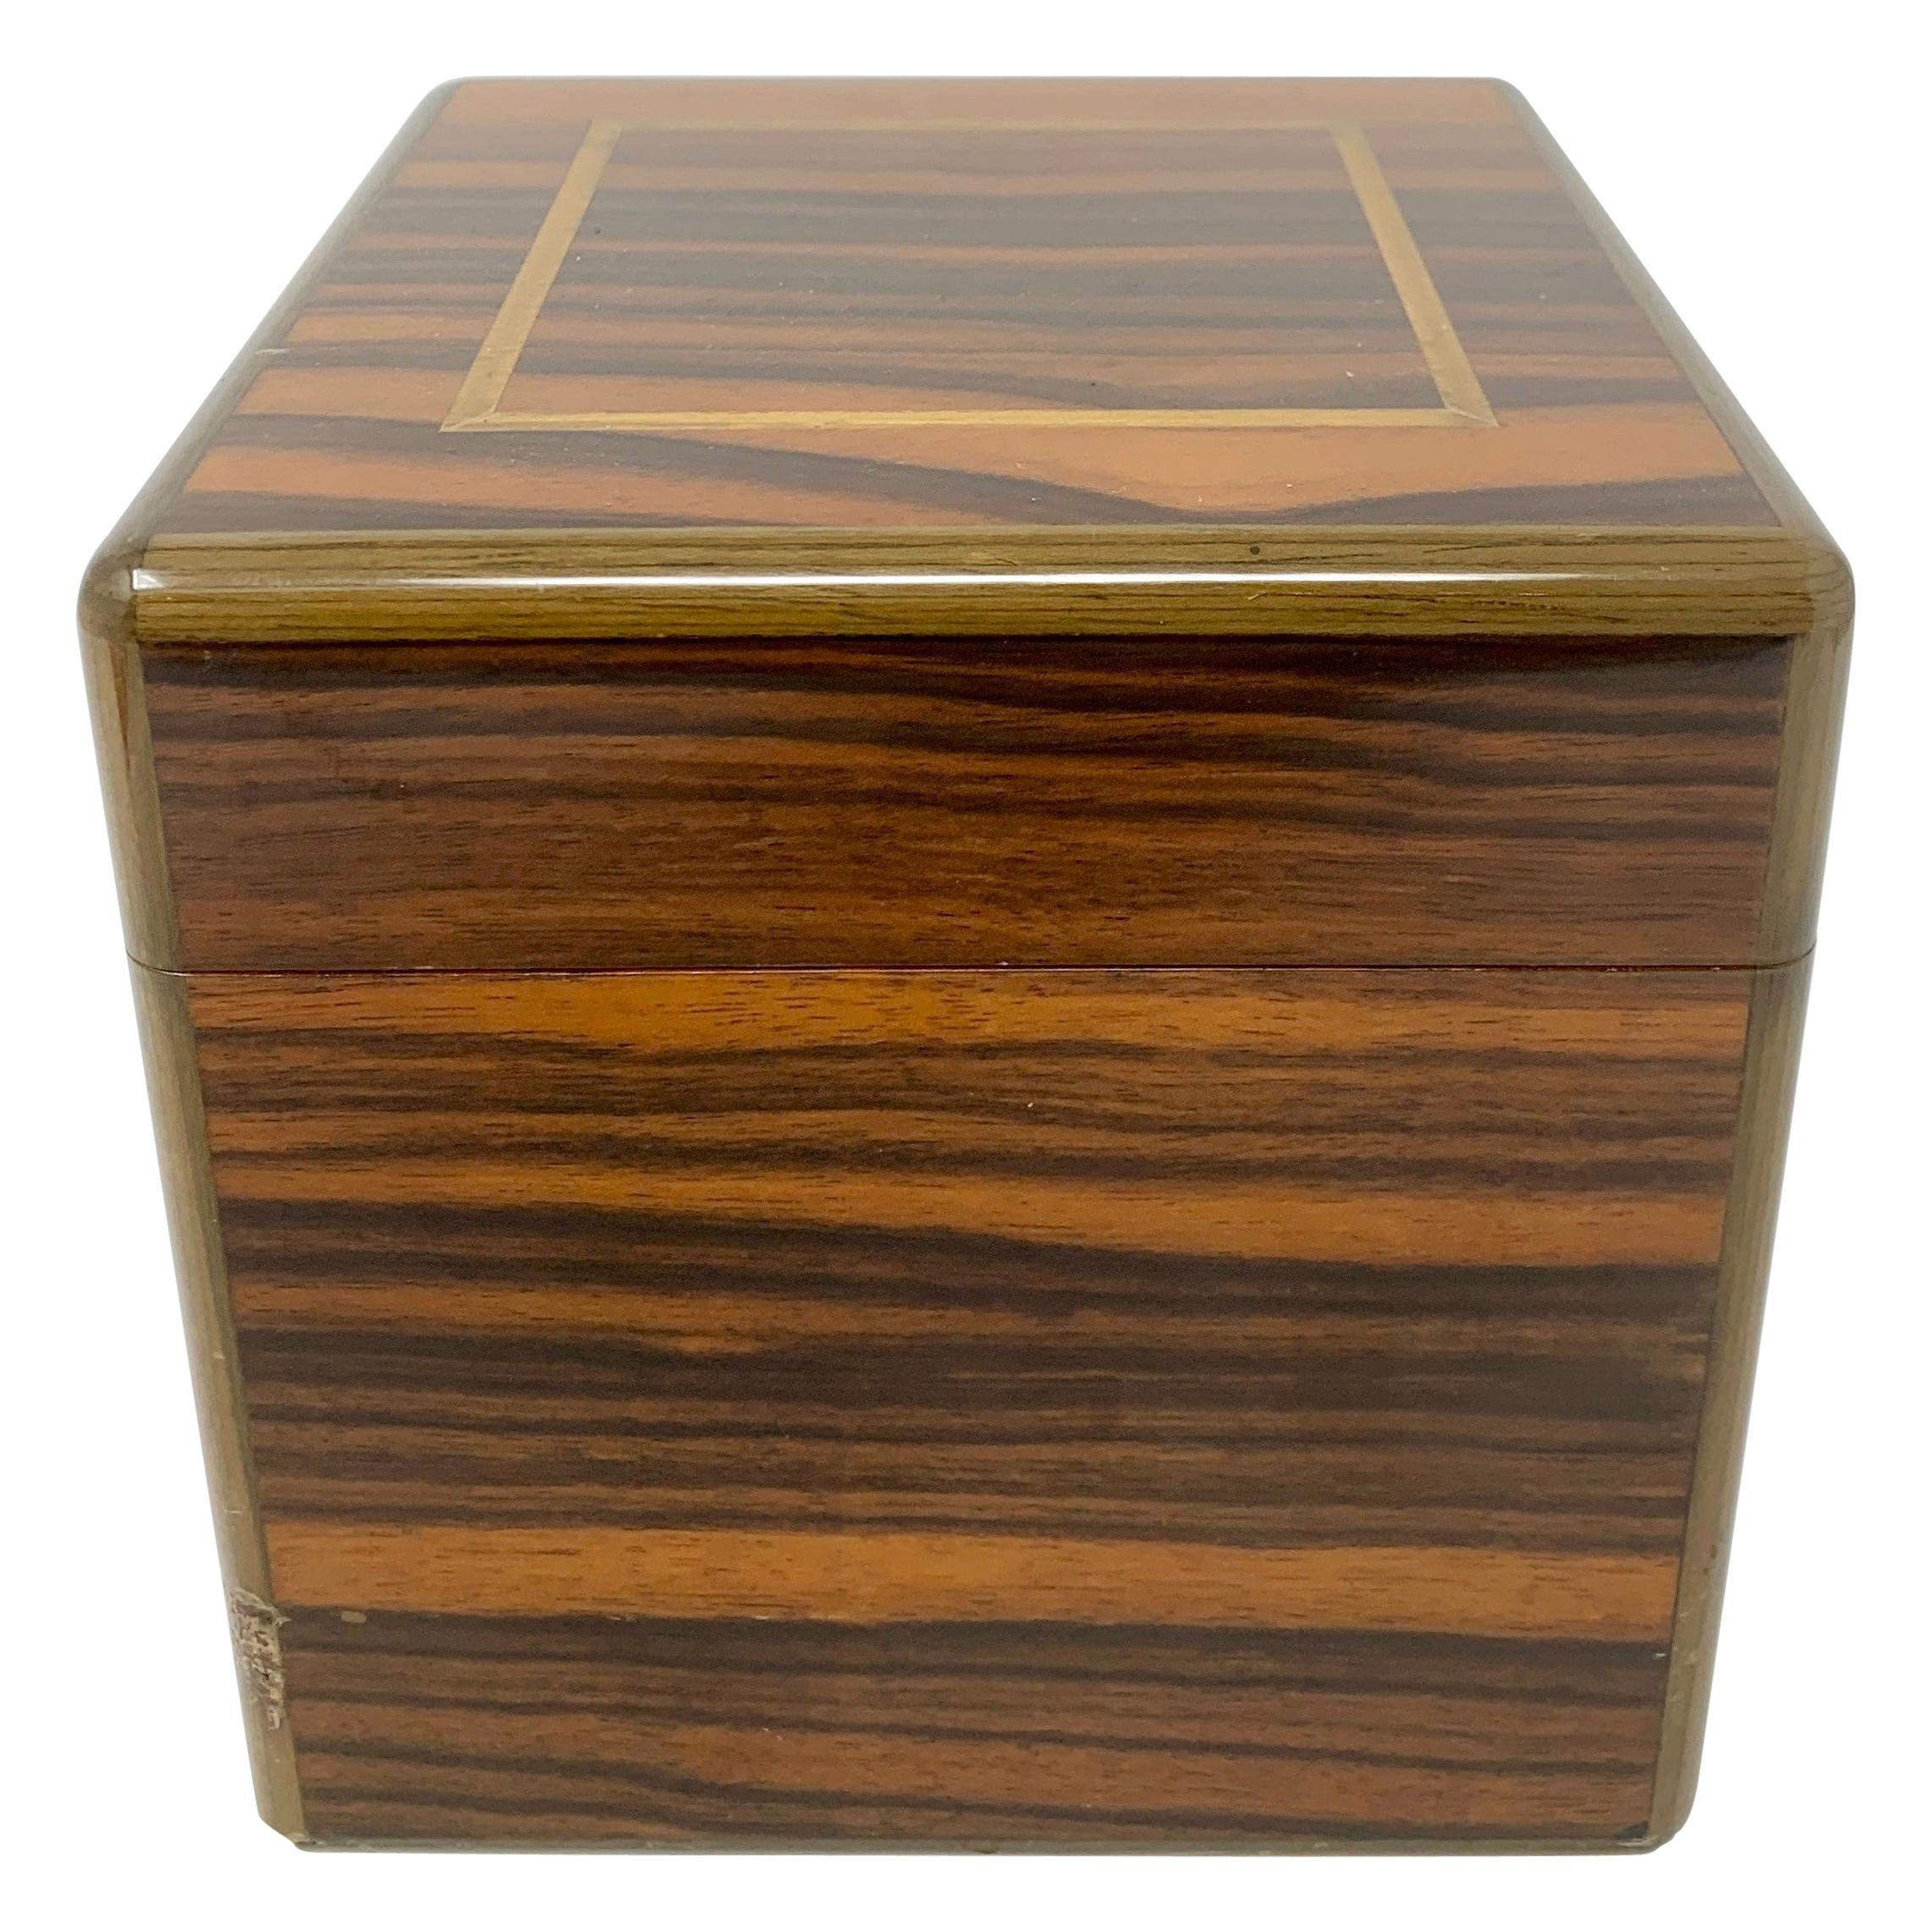 Antique French Coromandel Wood Humidor Made by Dunhill